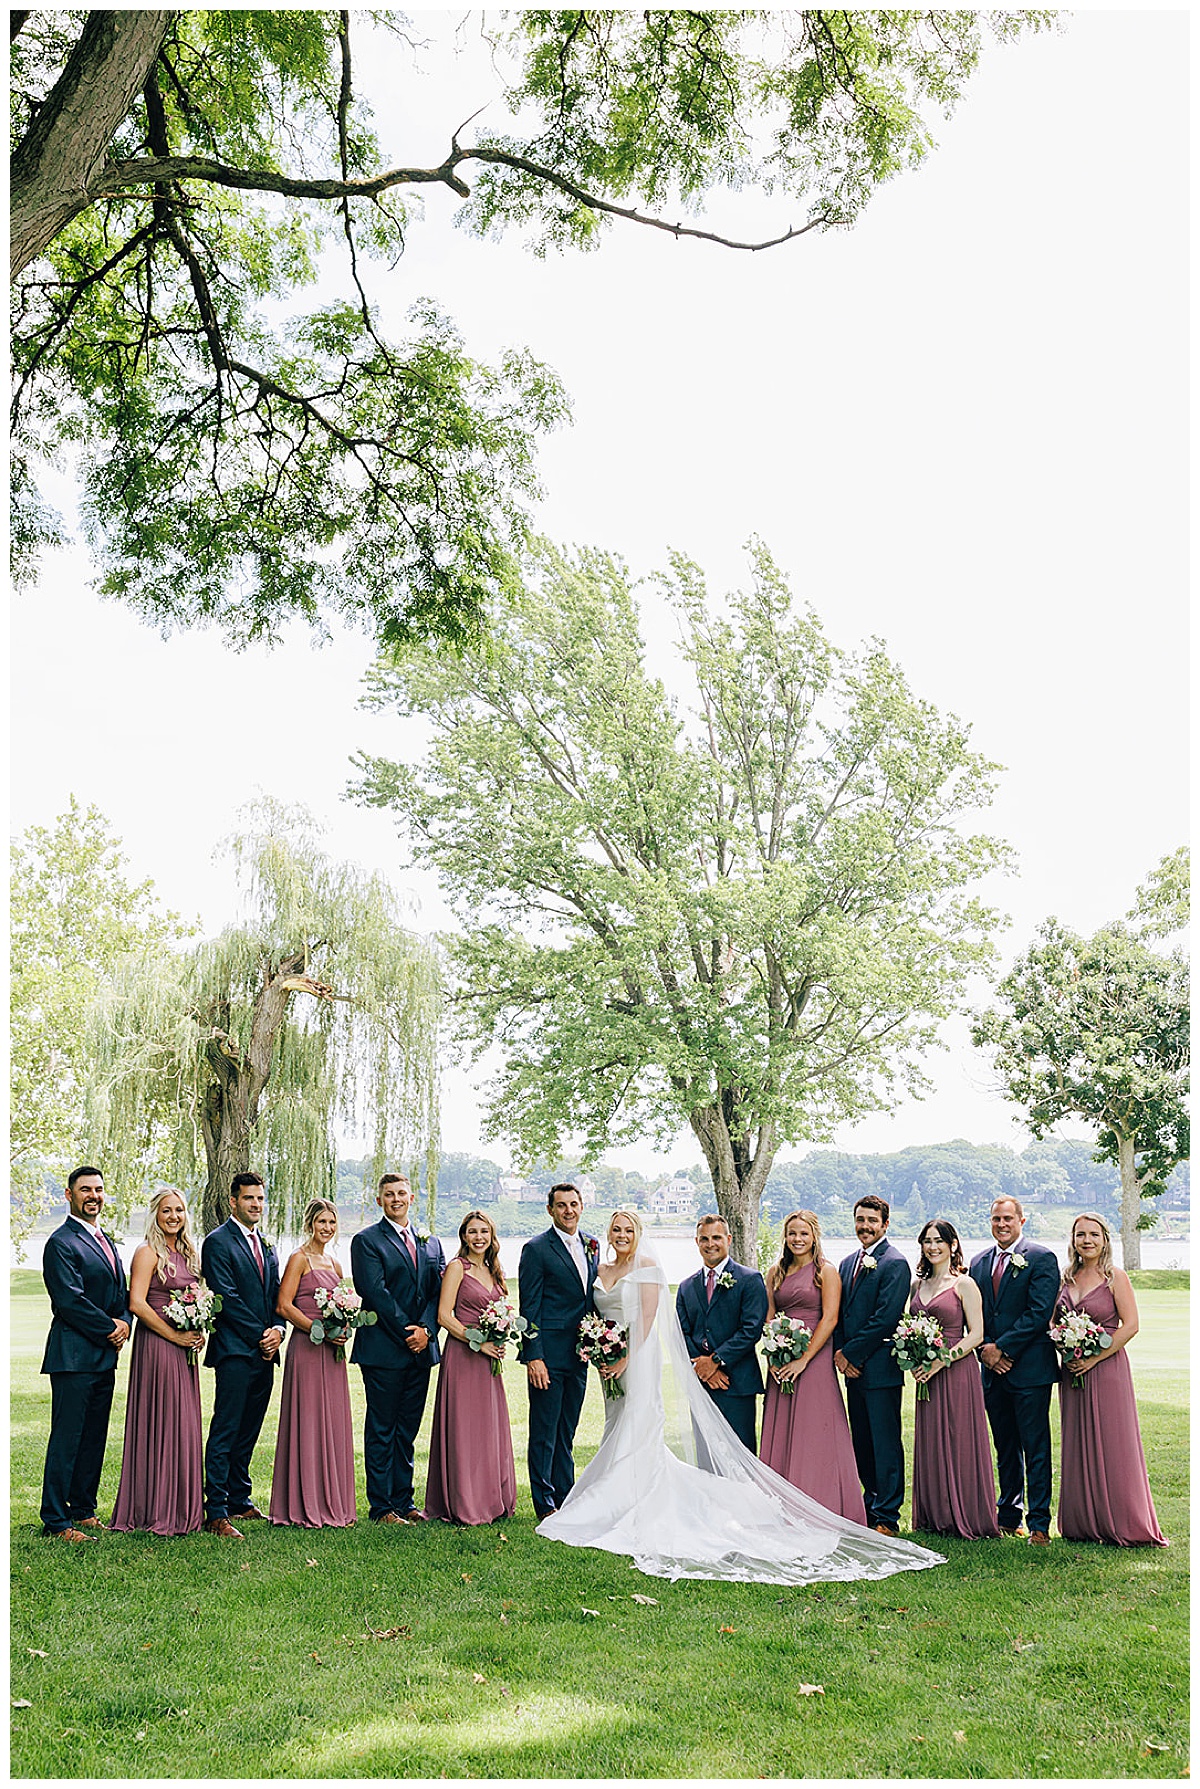 All smiles near bride and groom by Kayla Bouren Photography